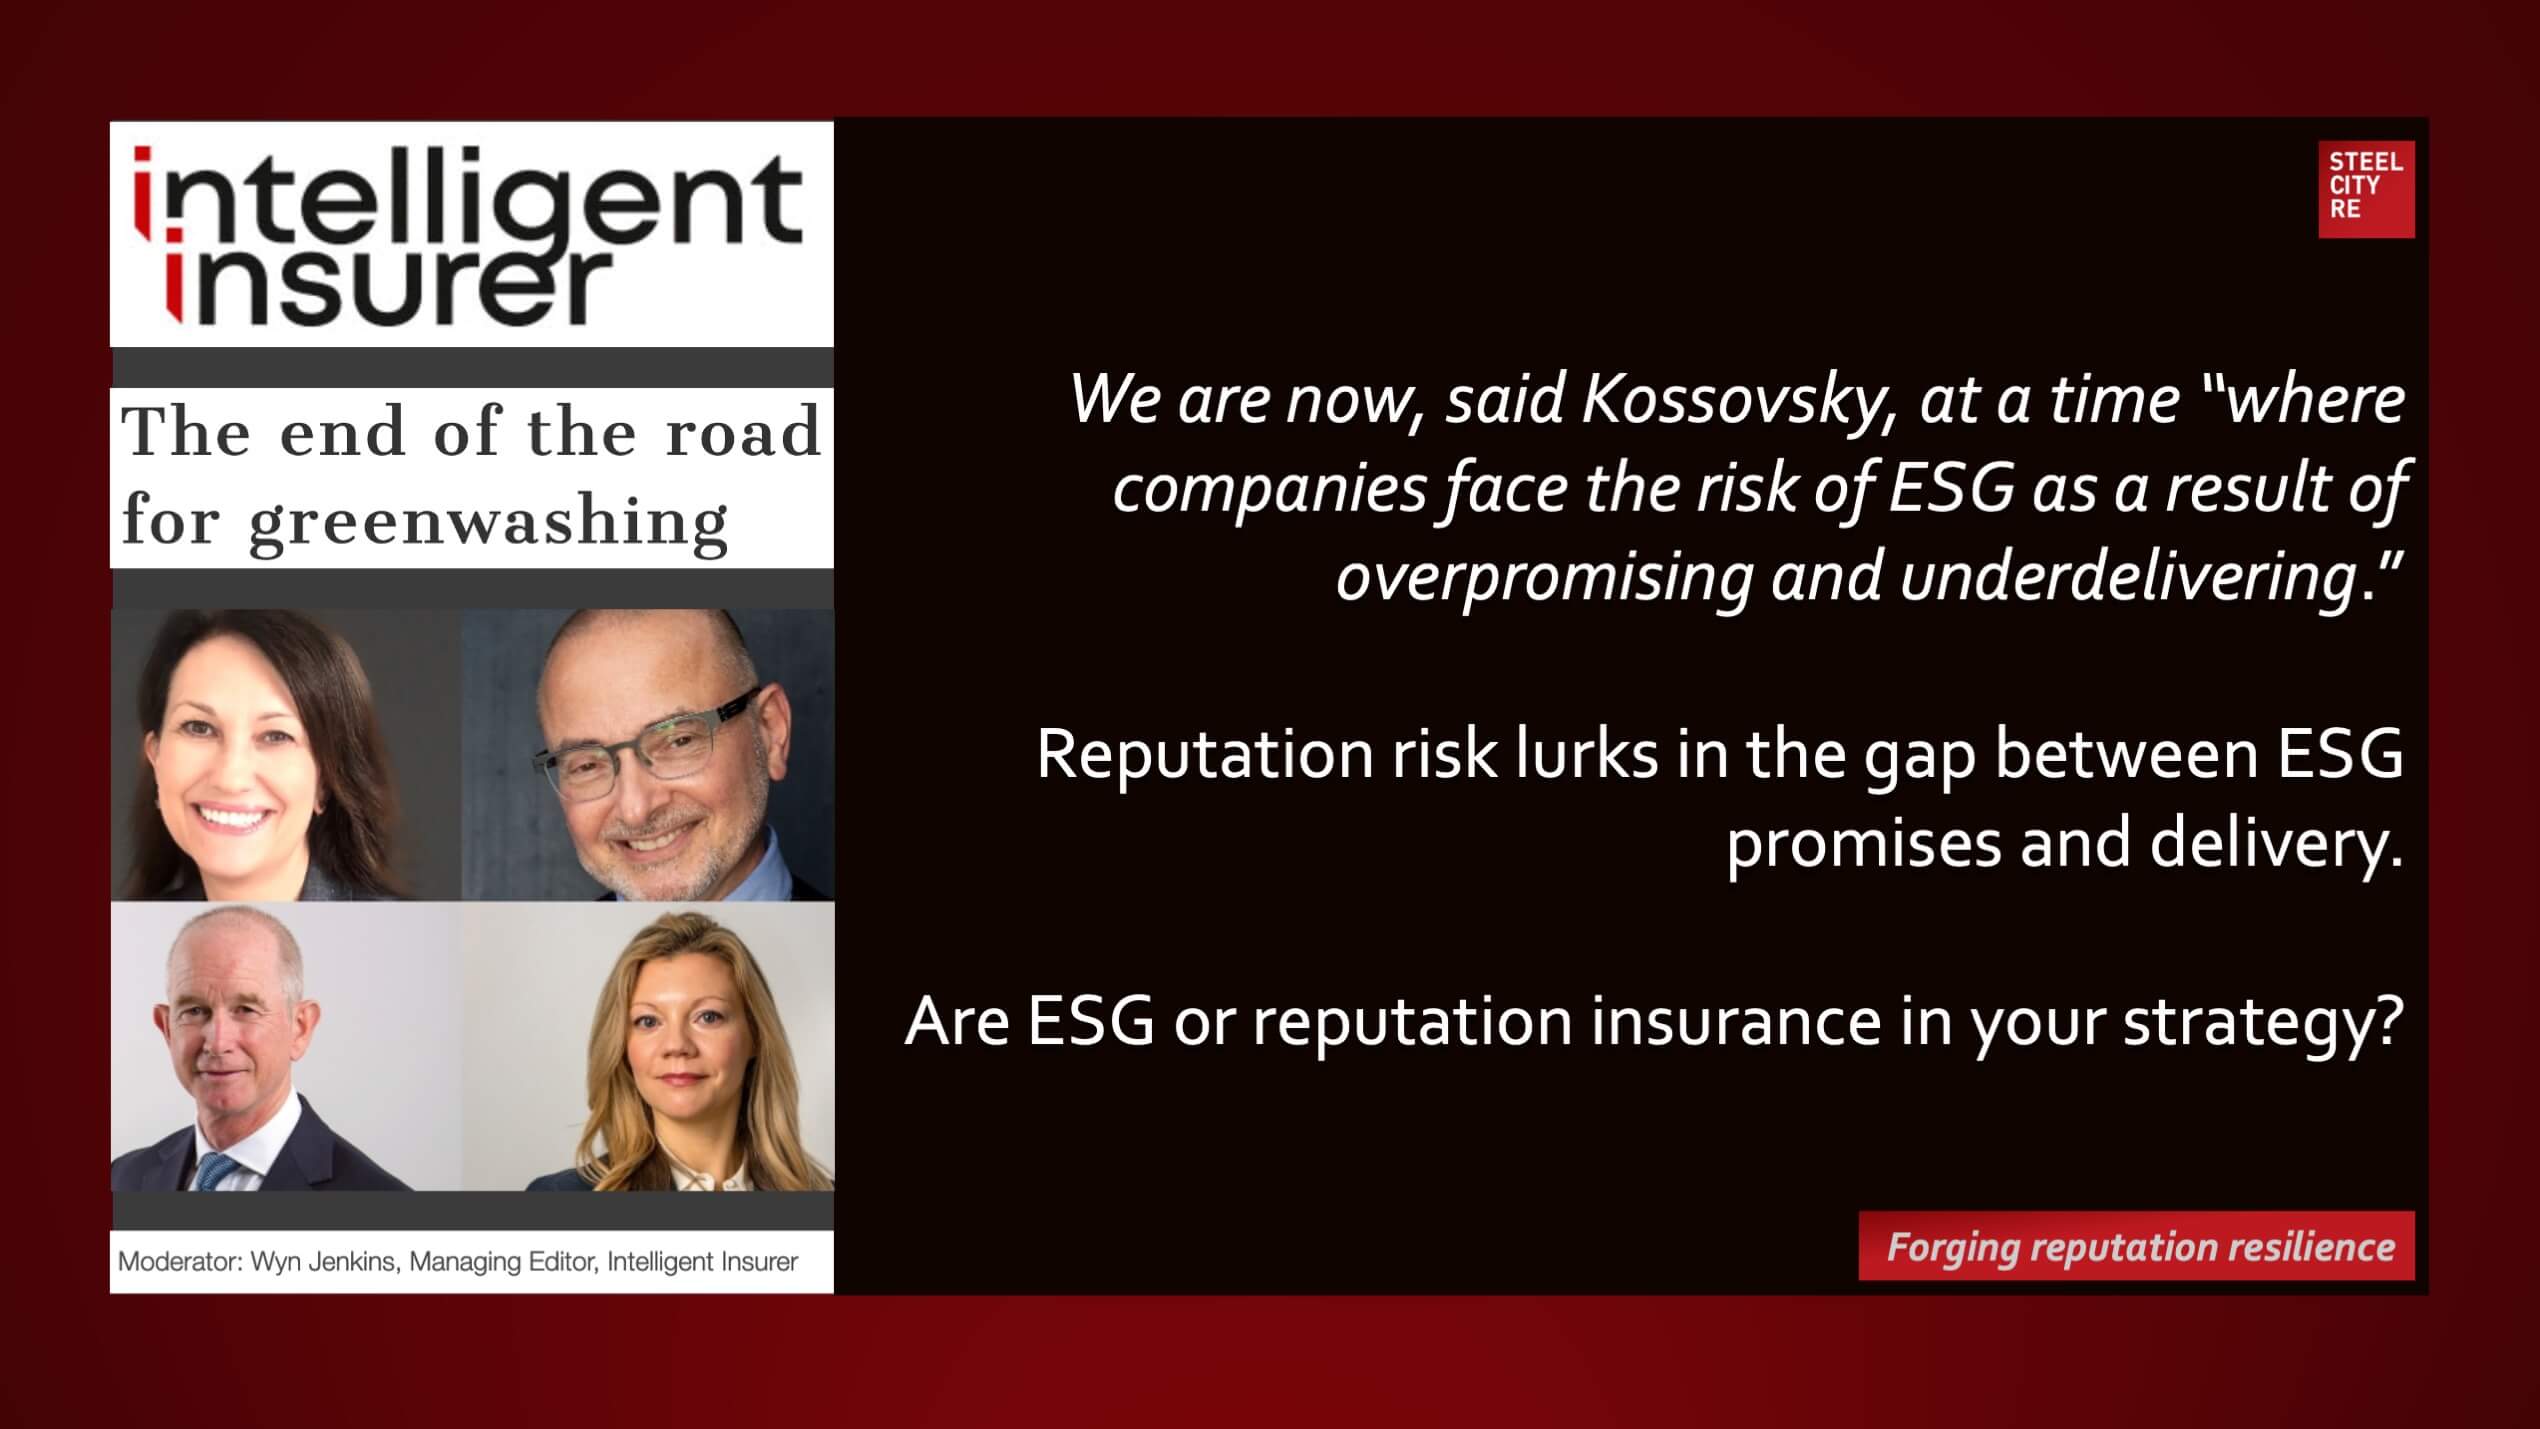 Key to an ESG reputation strategy is no greenwashing, for reputation risk lurks in the gap between ESG promises and delivery- Steel City Re